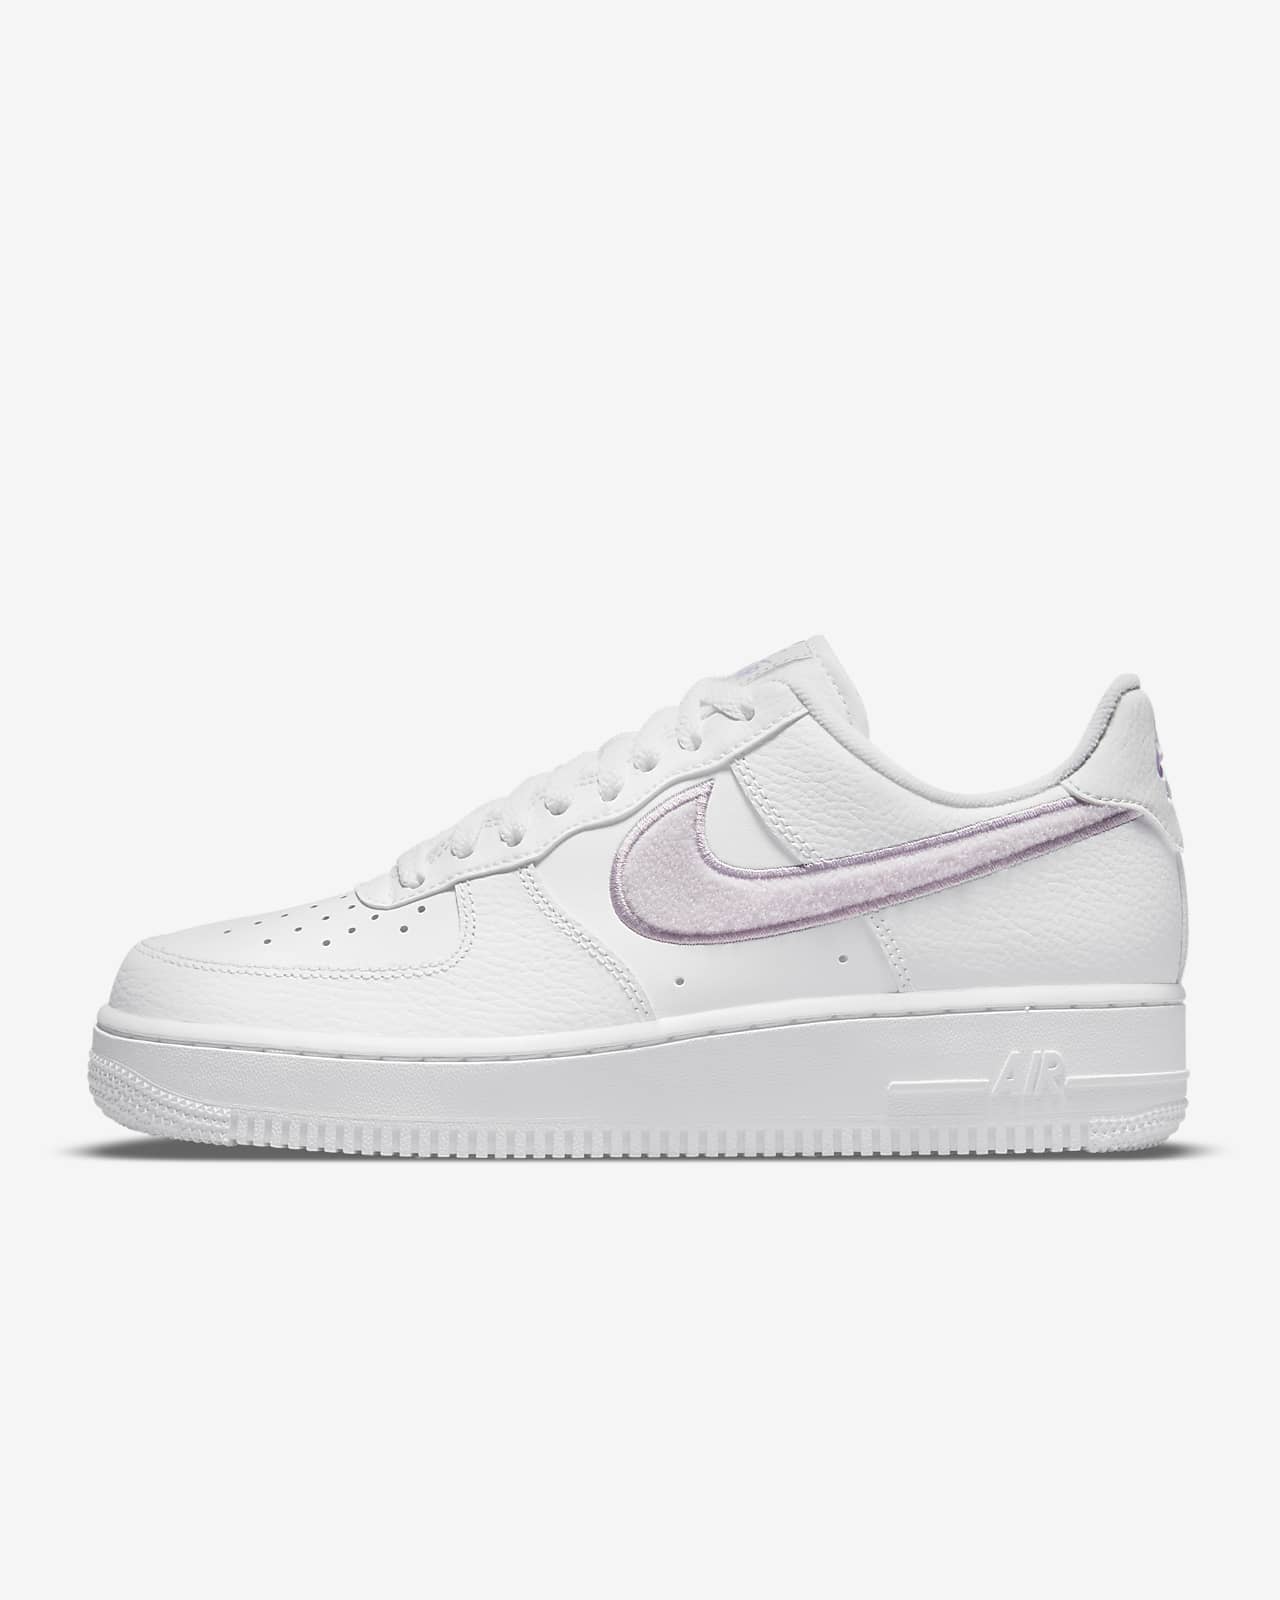 Chaussure Nike Air Force 1 '07 Essential pour Femme. Nike CA